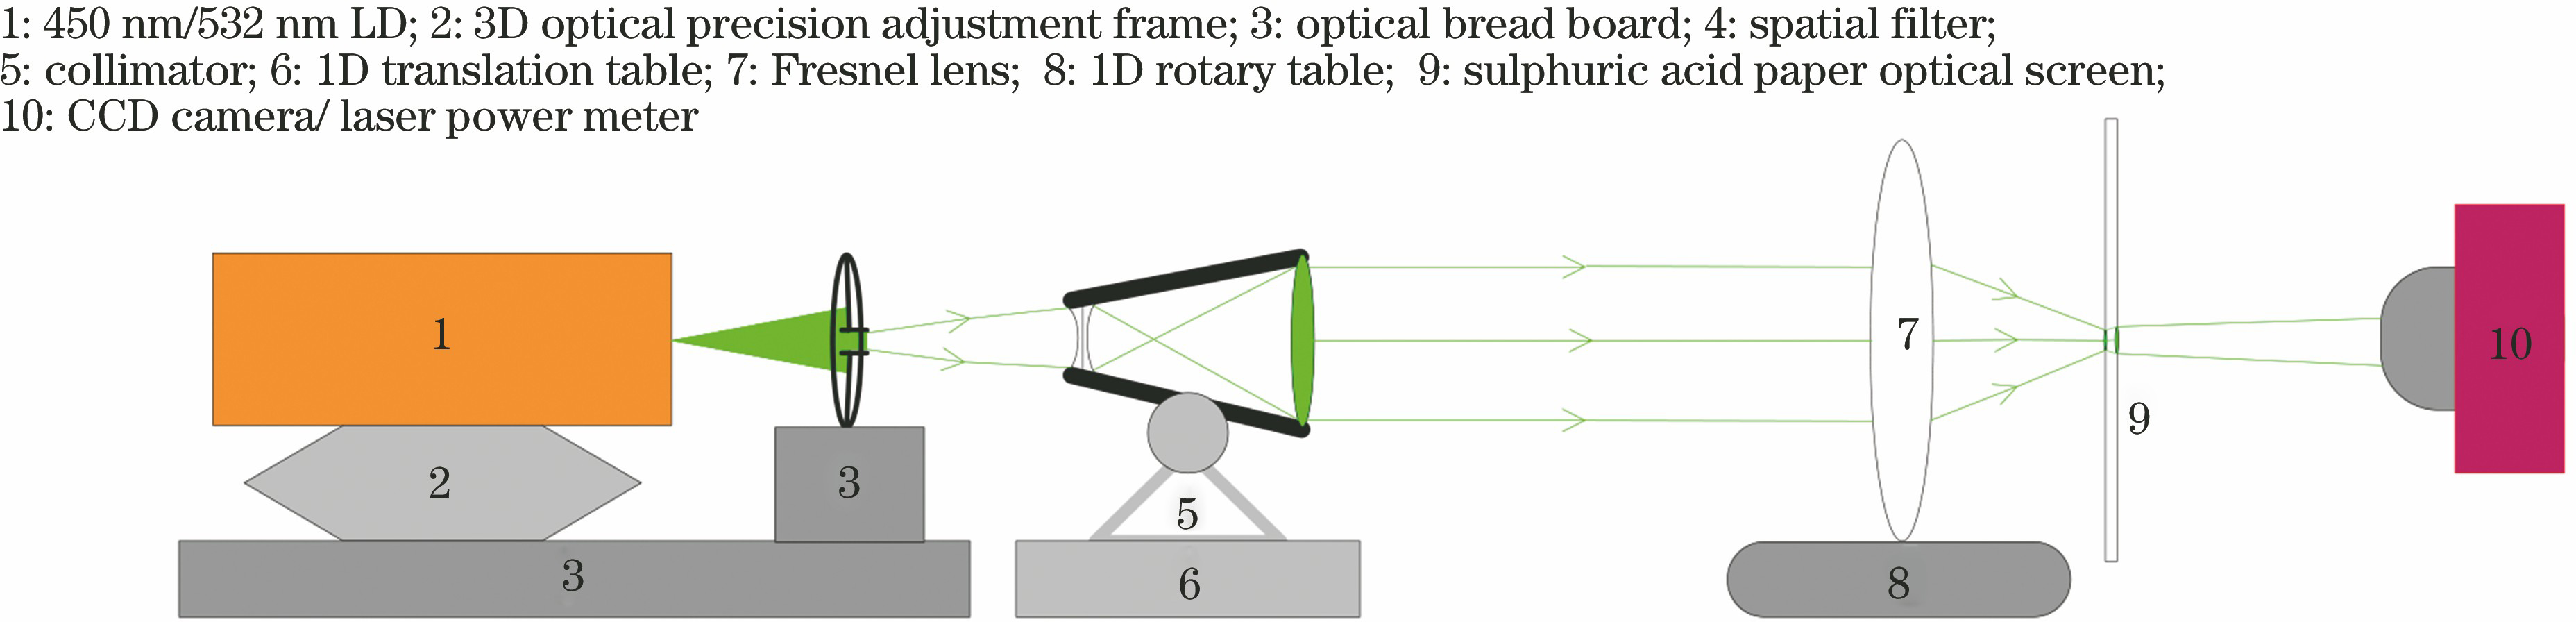 Principle of focusing performance measurement of Fresnel lens with large aperture and short focal length